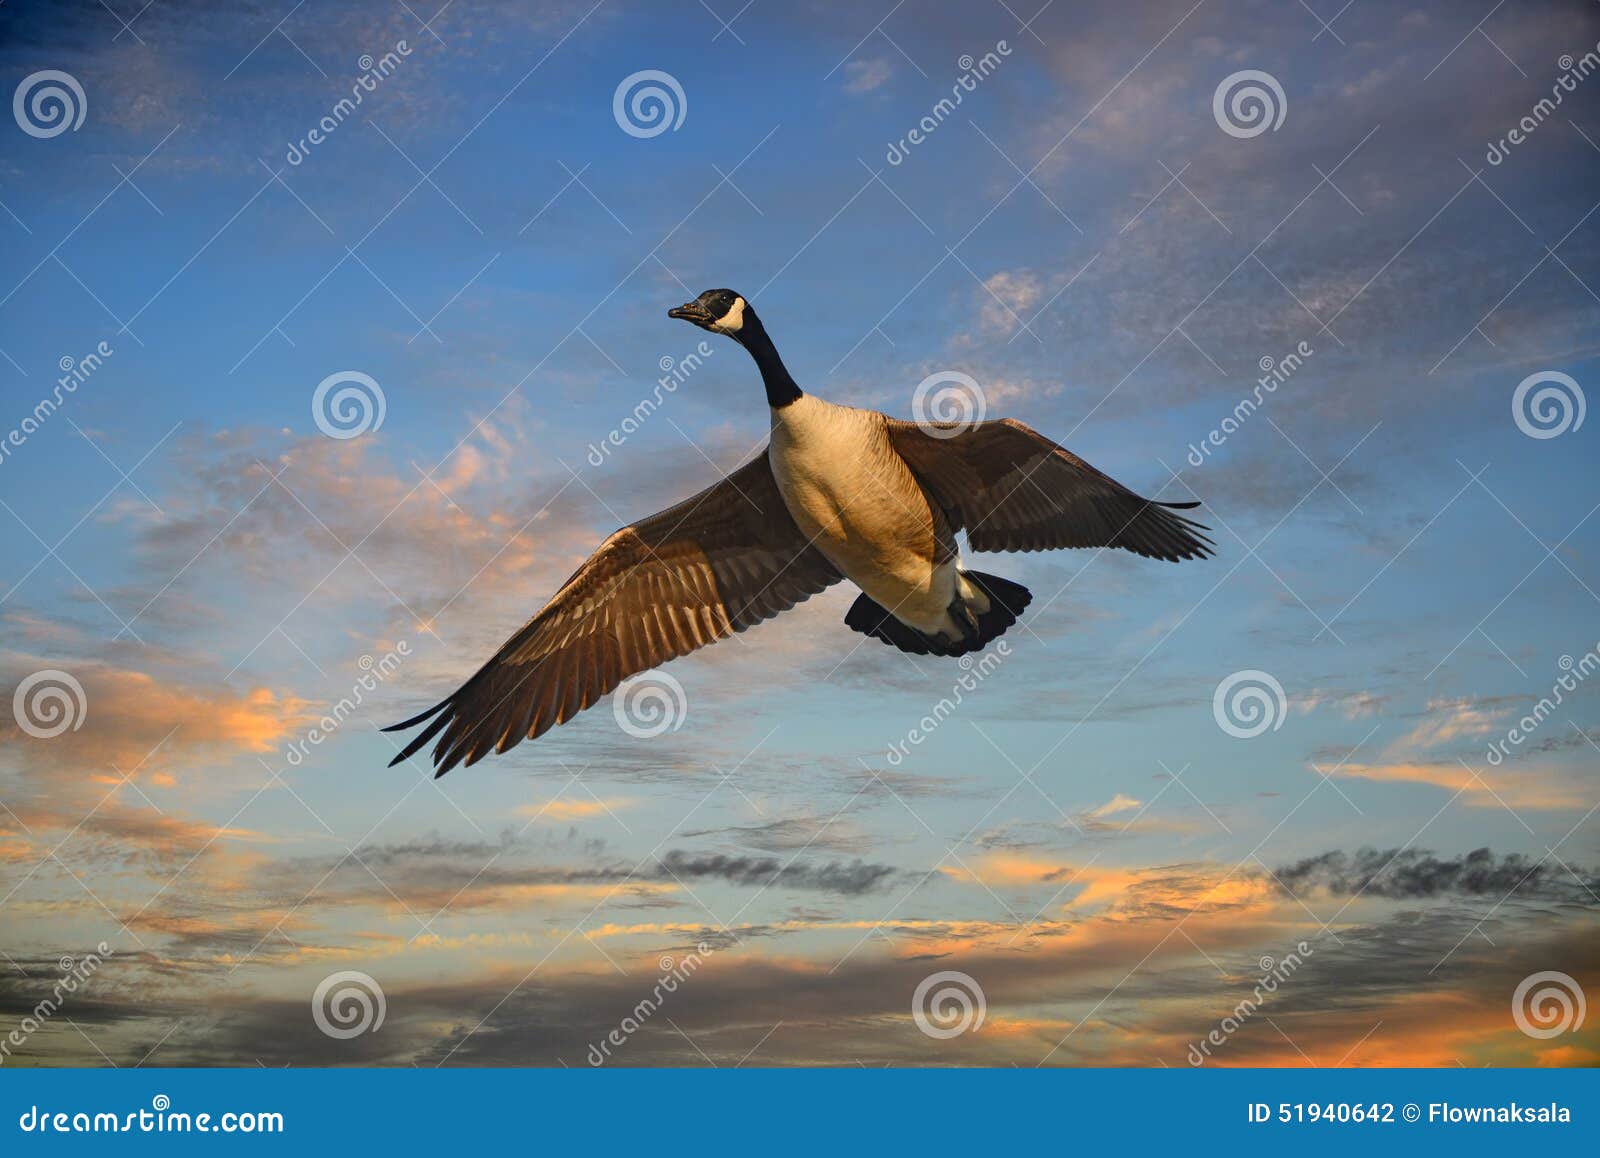 canadian goose flying at sunset